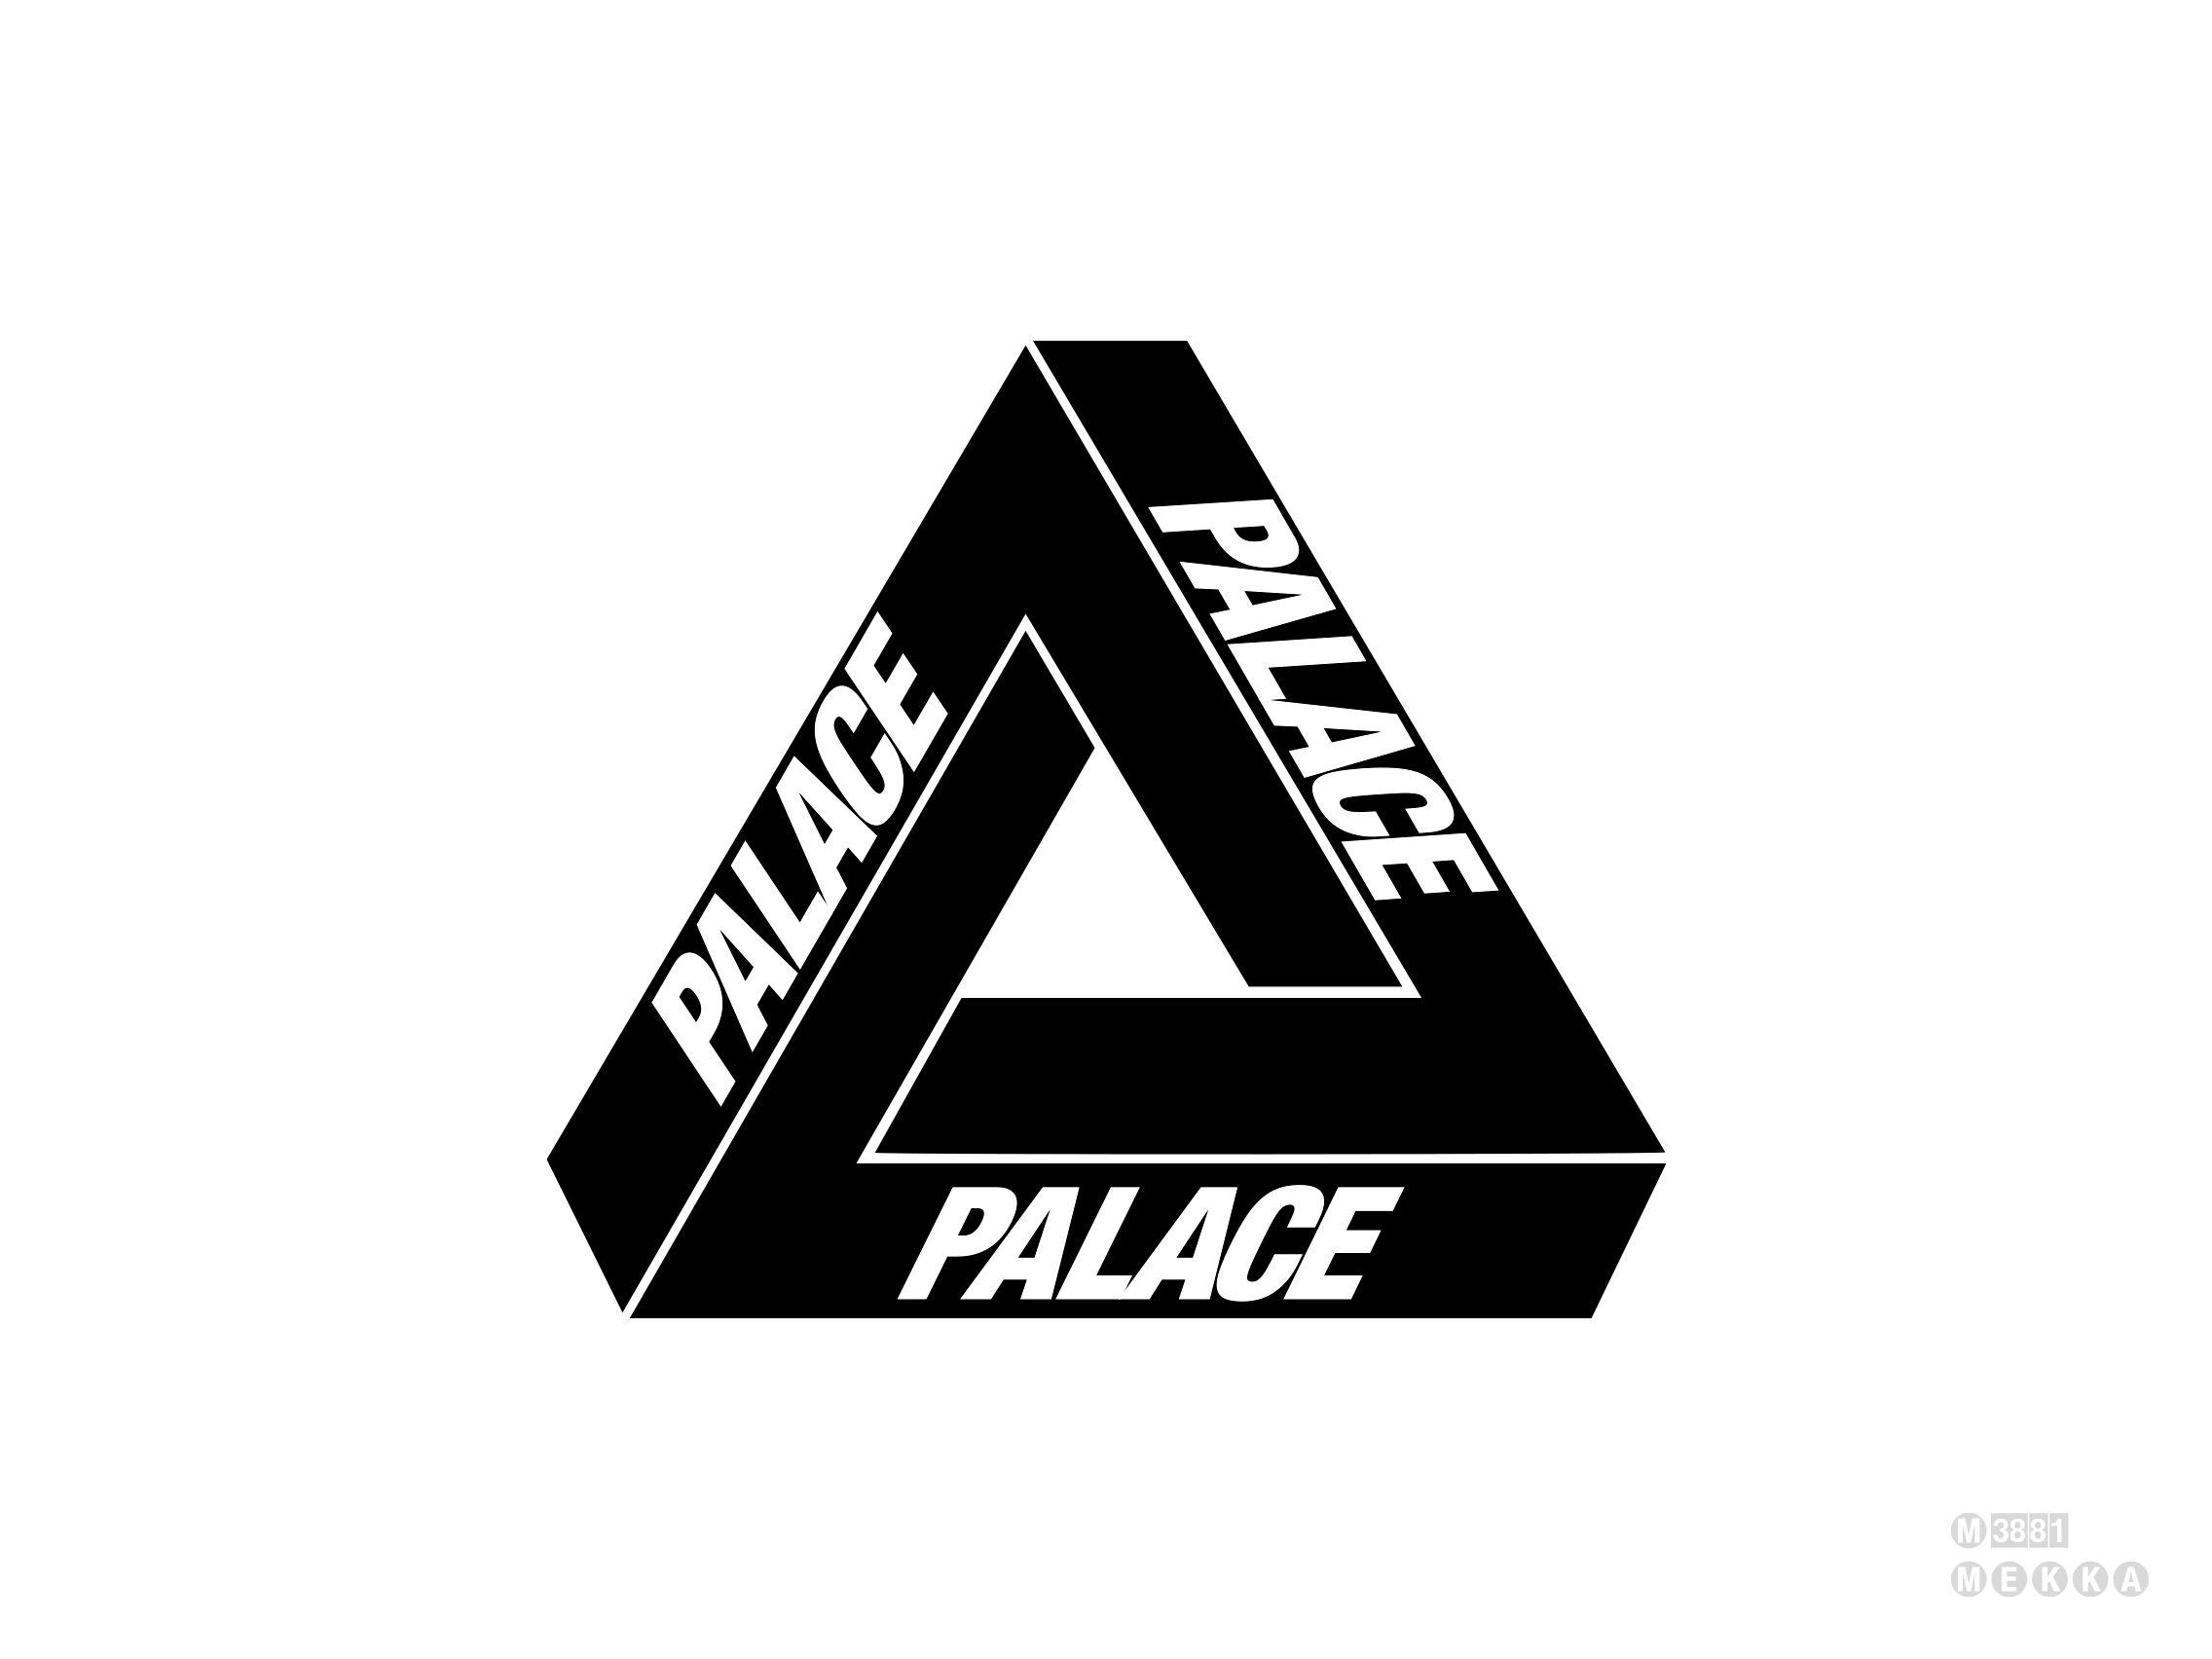 Palace Skateboards Logo - Palace skateboards Vector (black and White please) : vectorartrequests